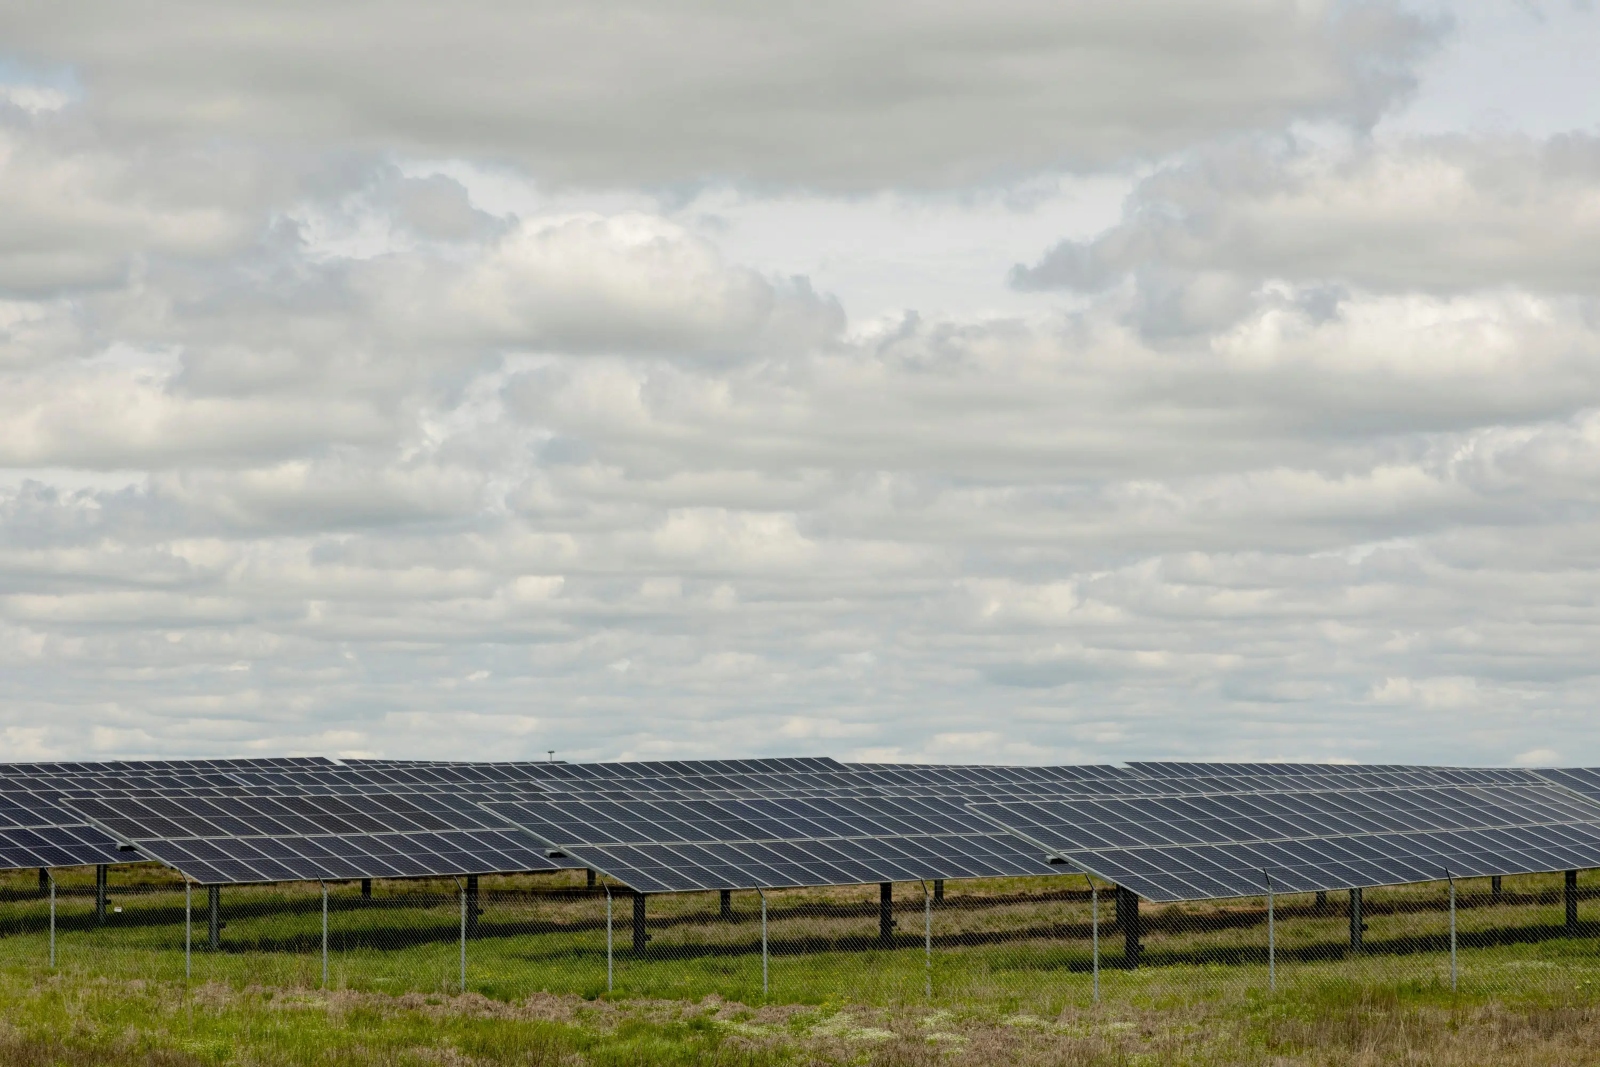 A green field covered in black solar panels under a cloudy sky.